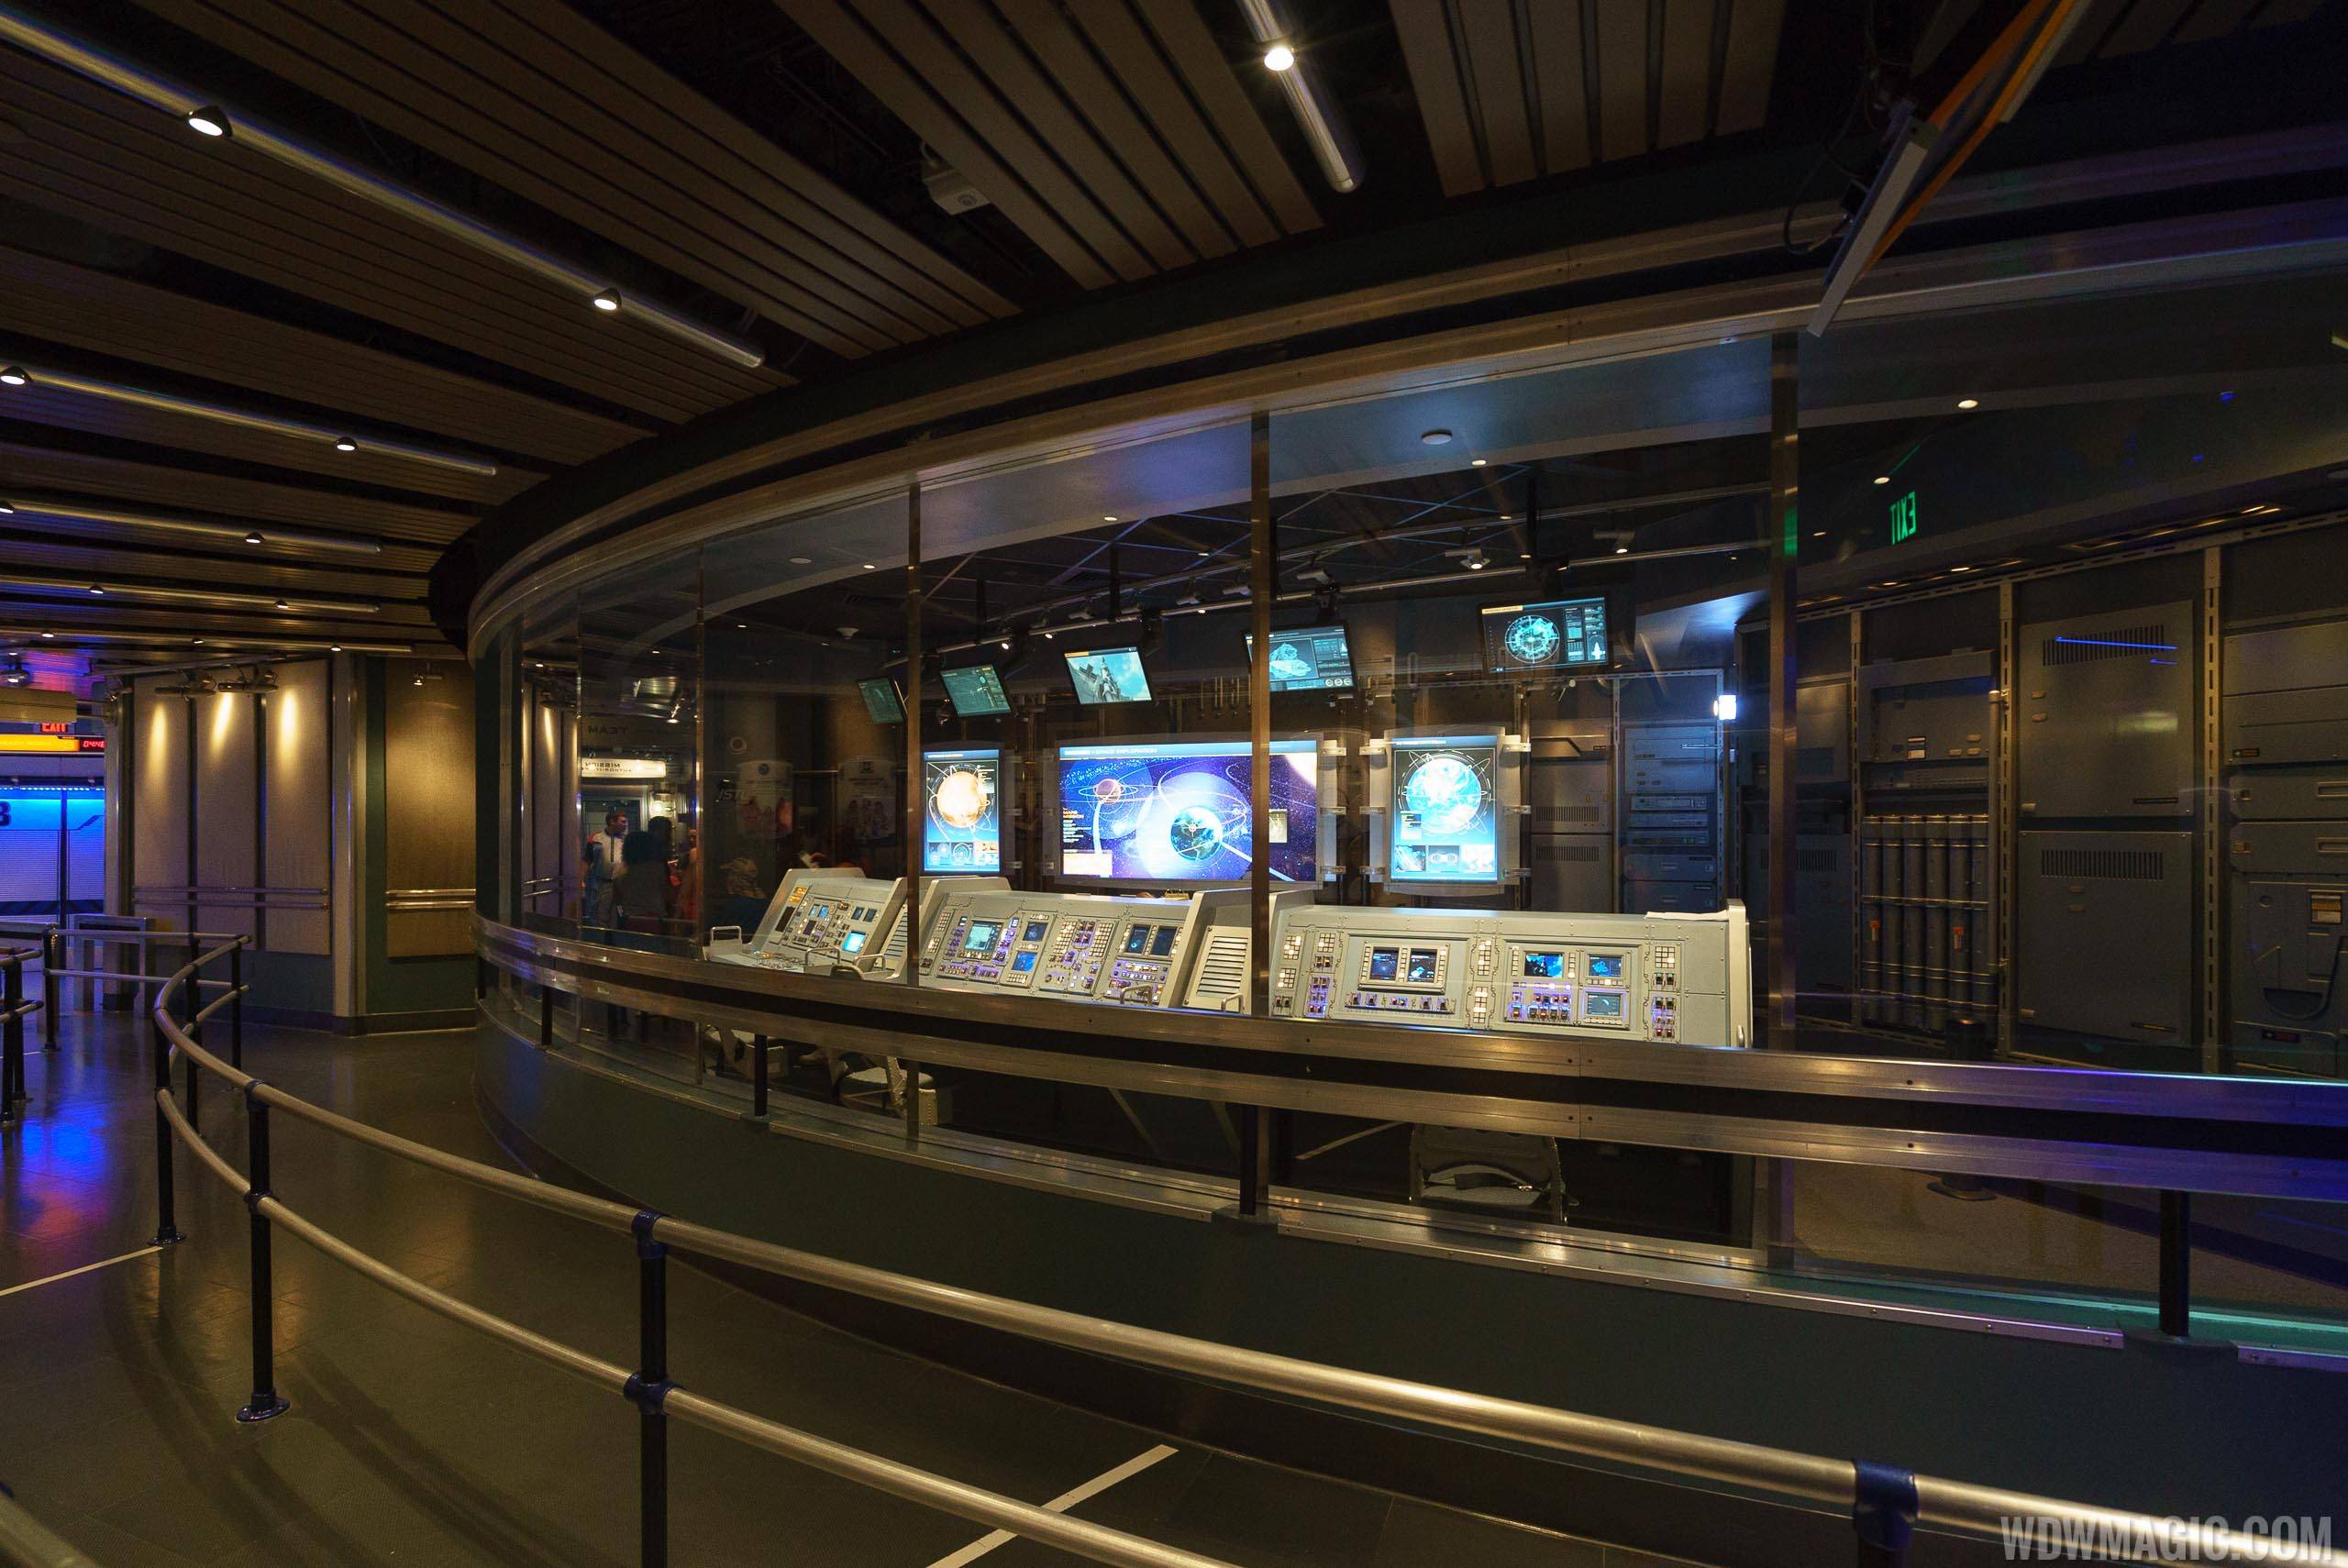 RELAUNCHED Mission SPACE